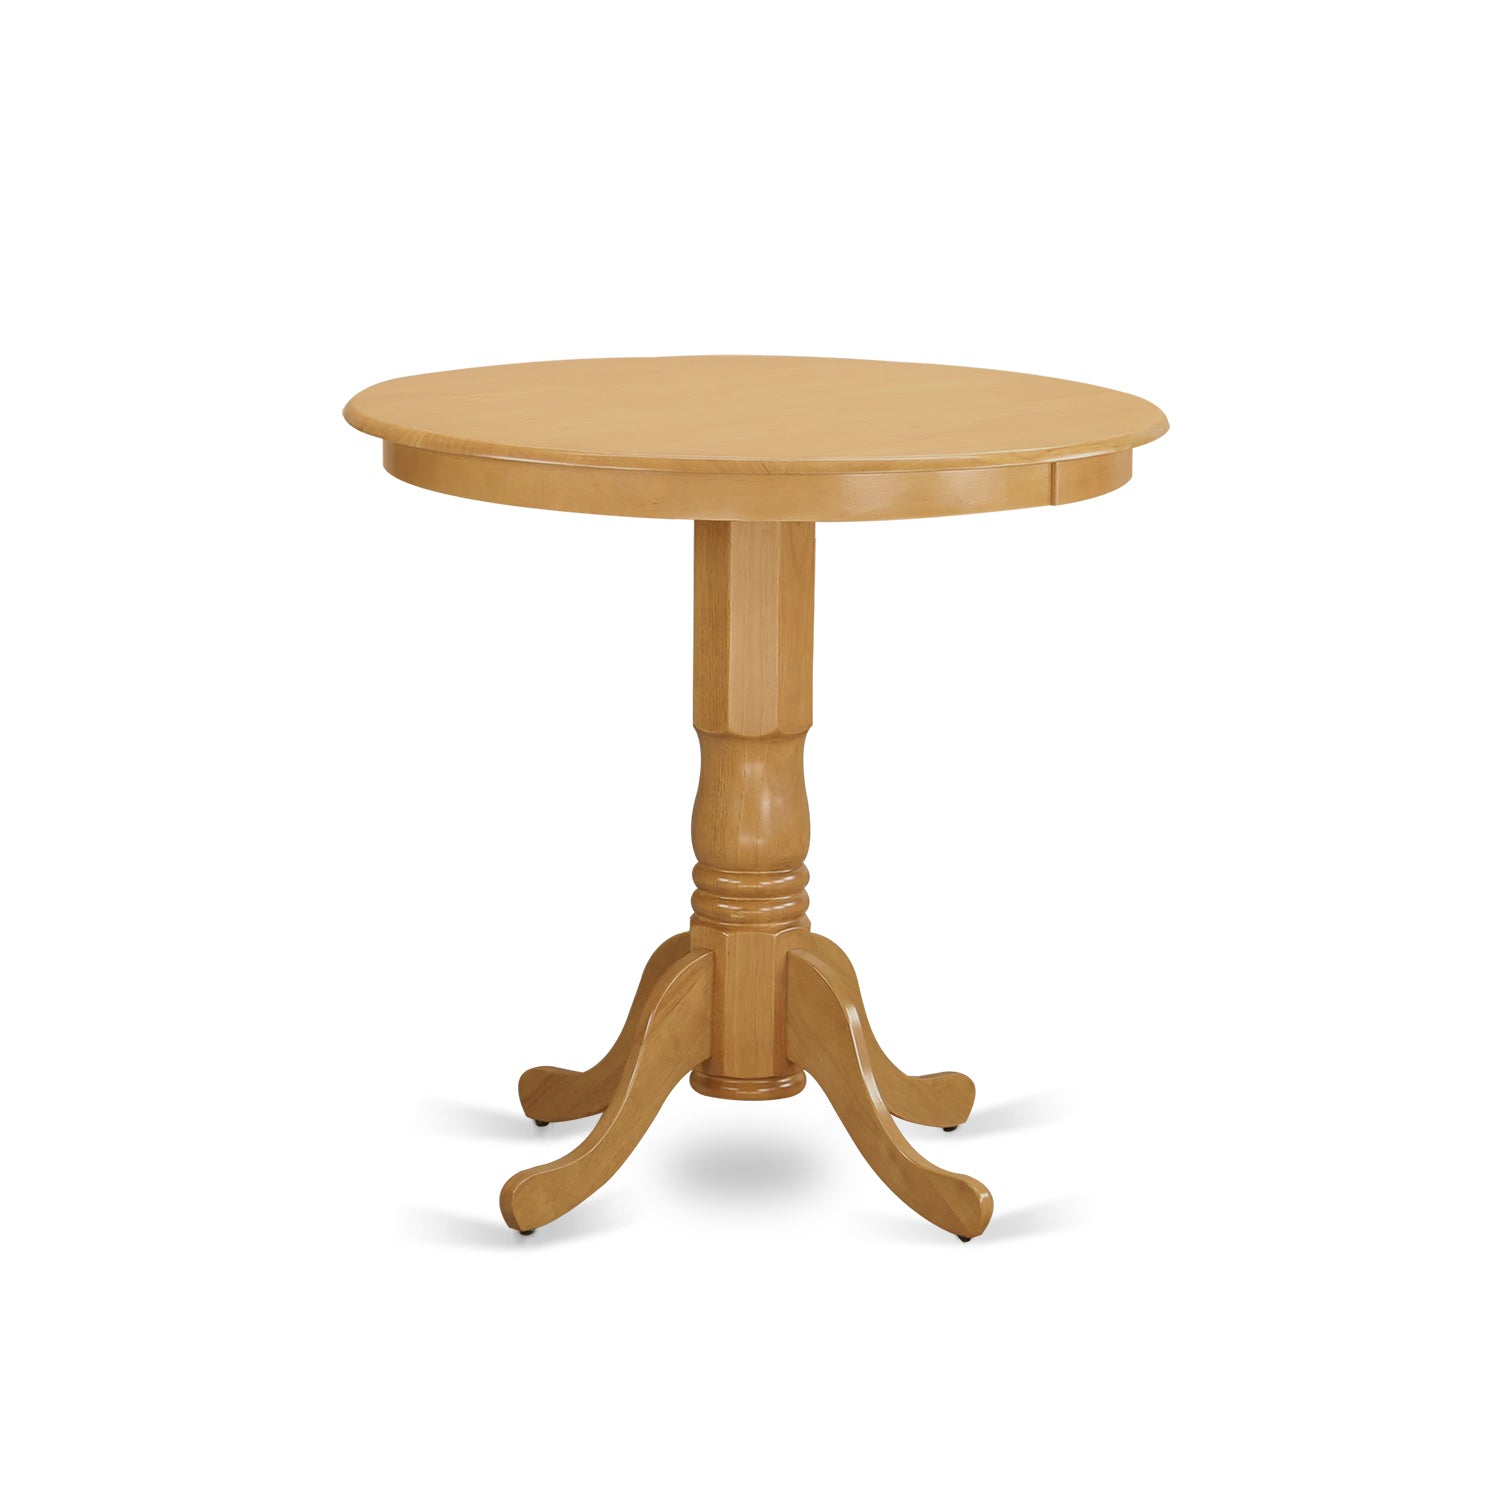 JAQU3-OAK-W 3 Pc counter height Dining room set - high Table and 2 counter height stool.